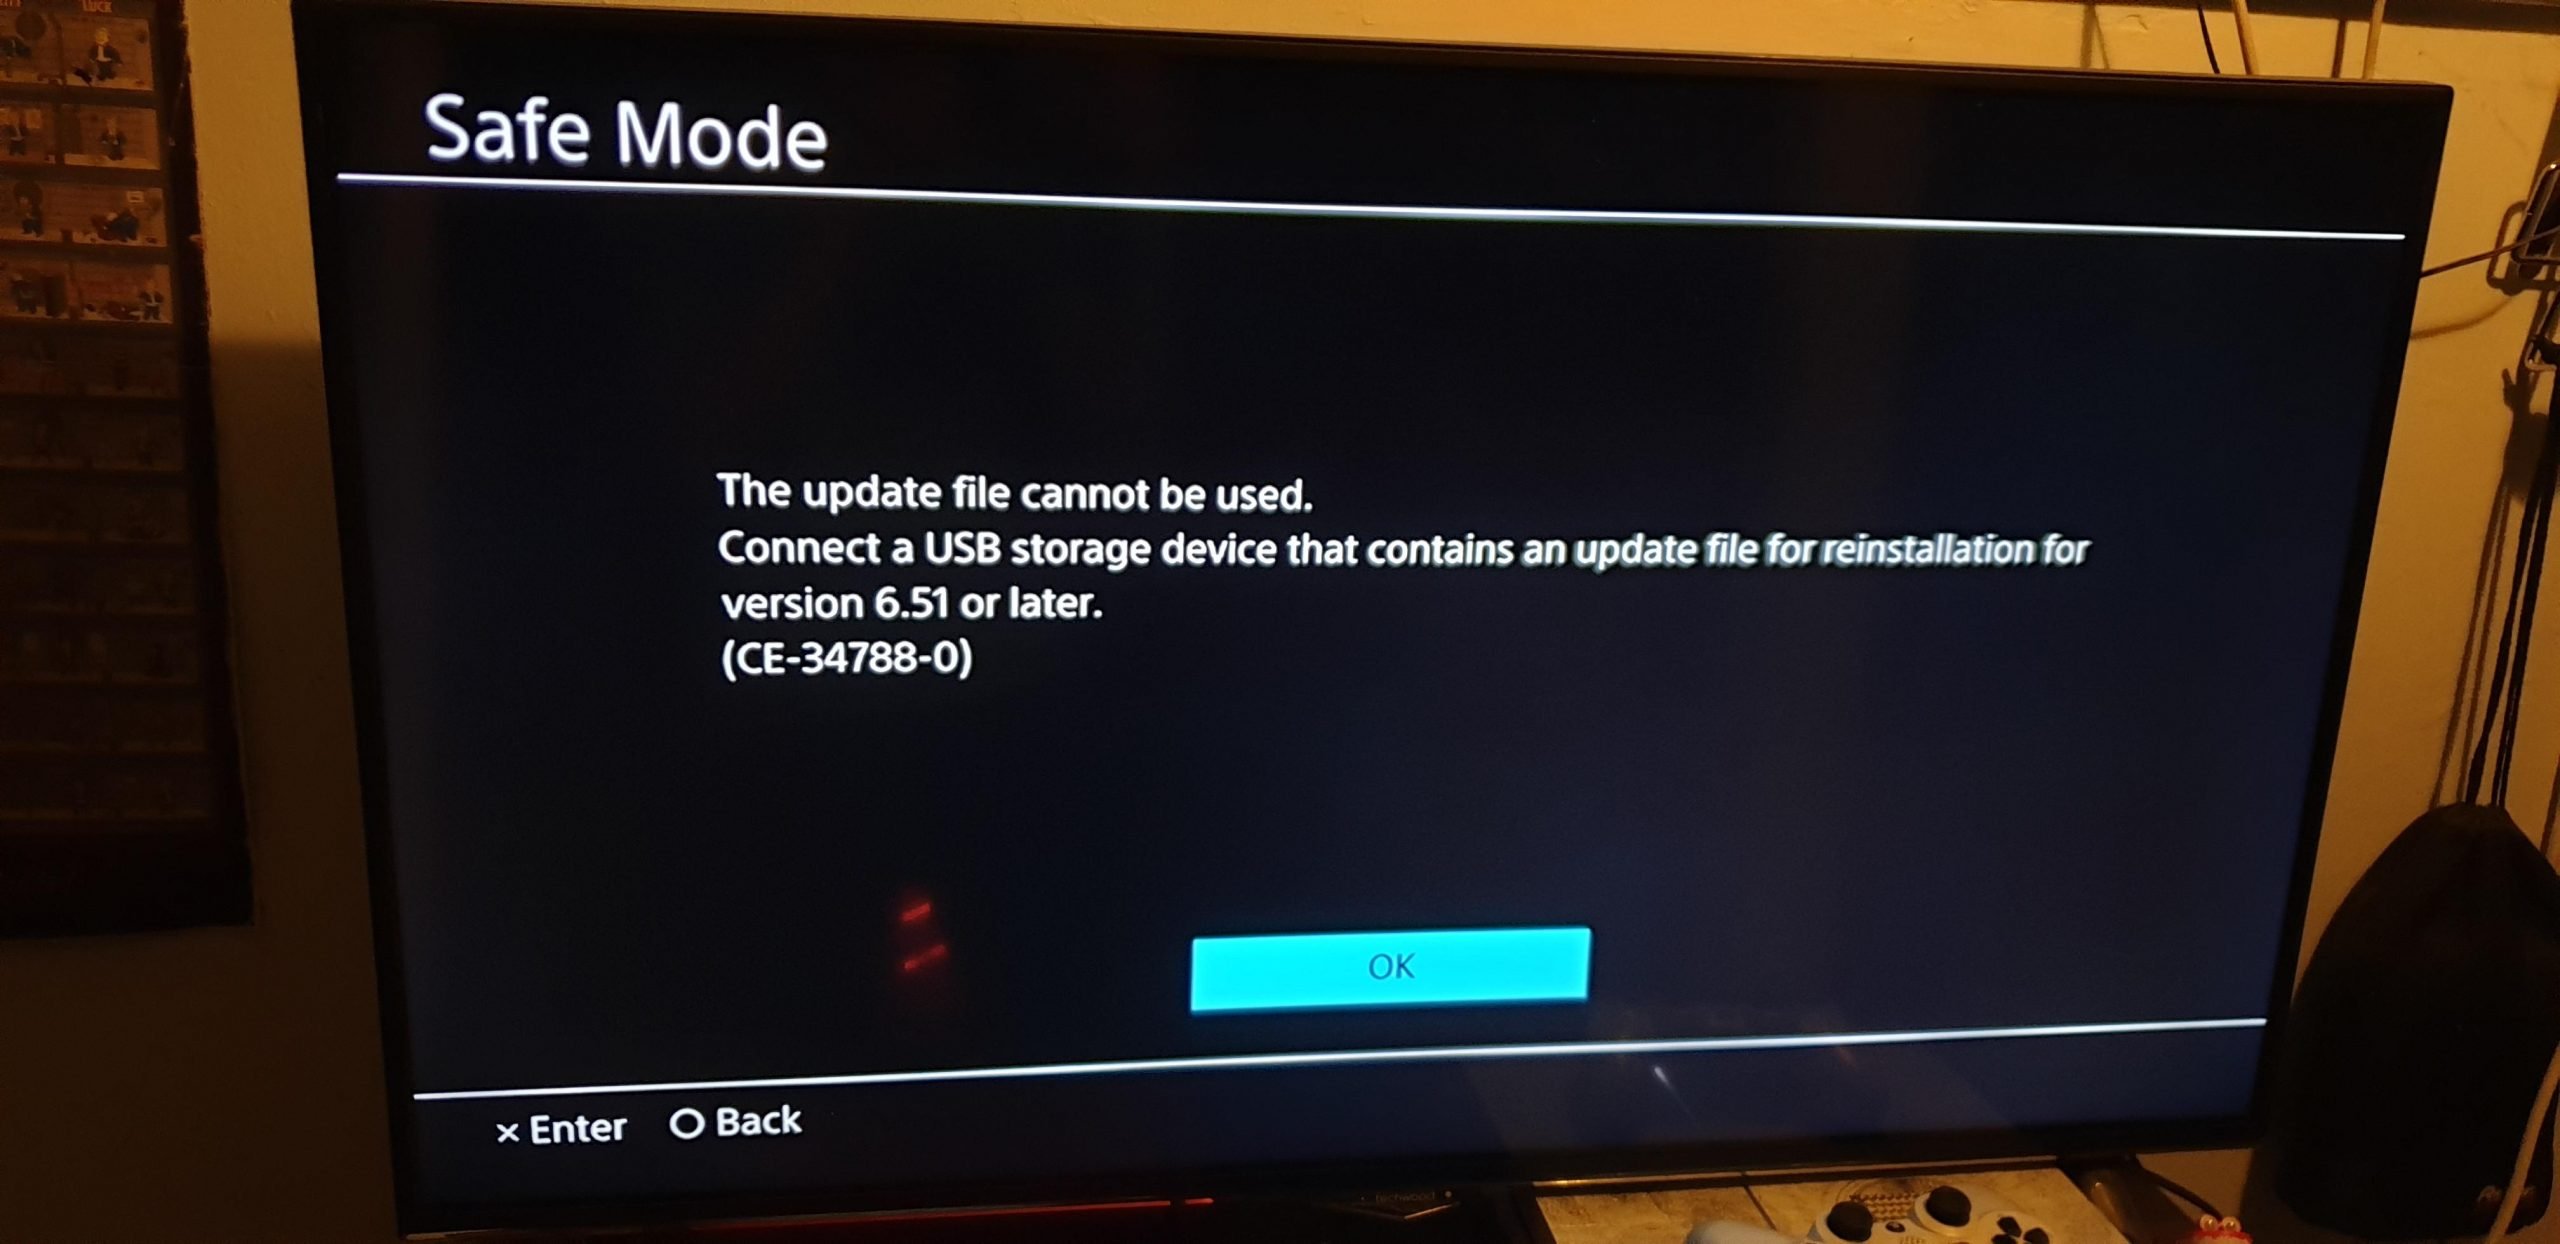 PS4 keeps booting in Safe Mode [Solved]